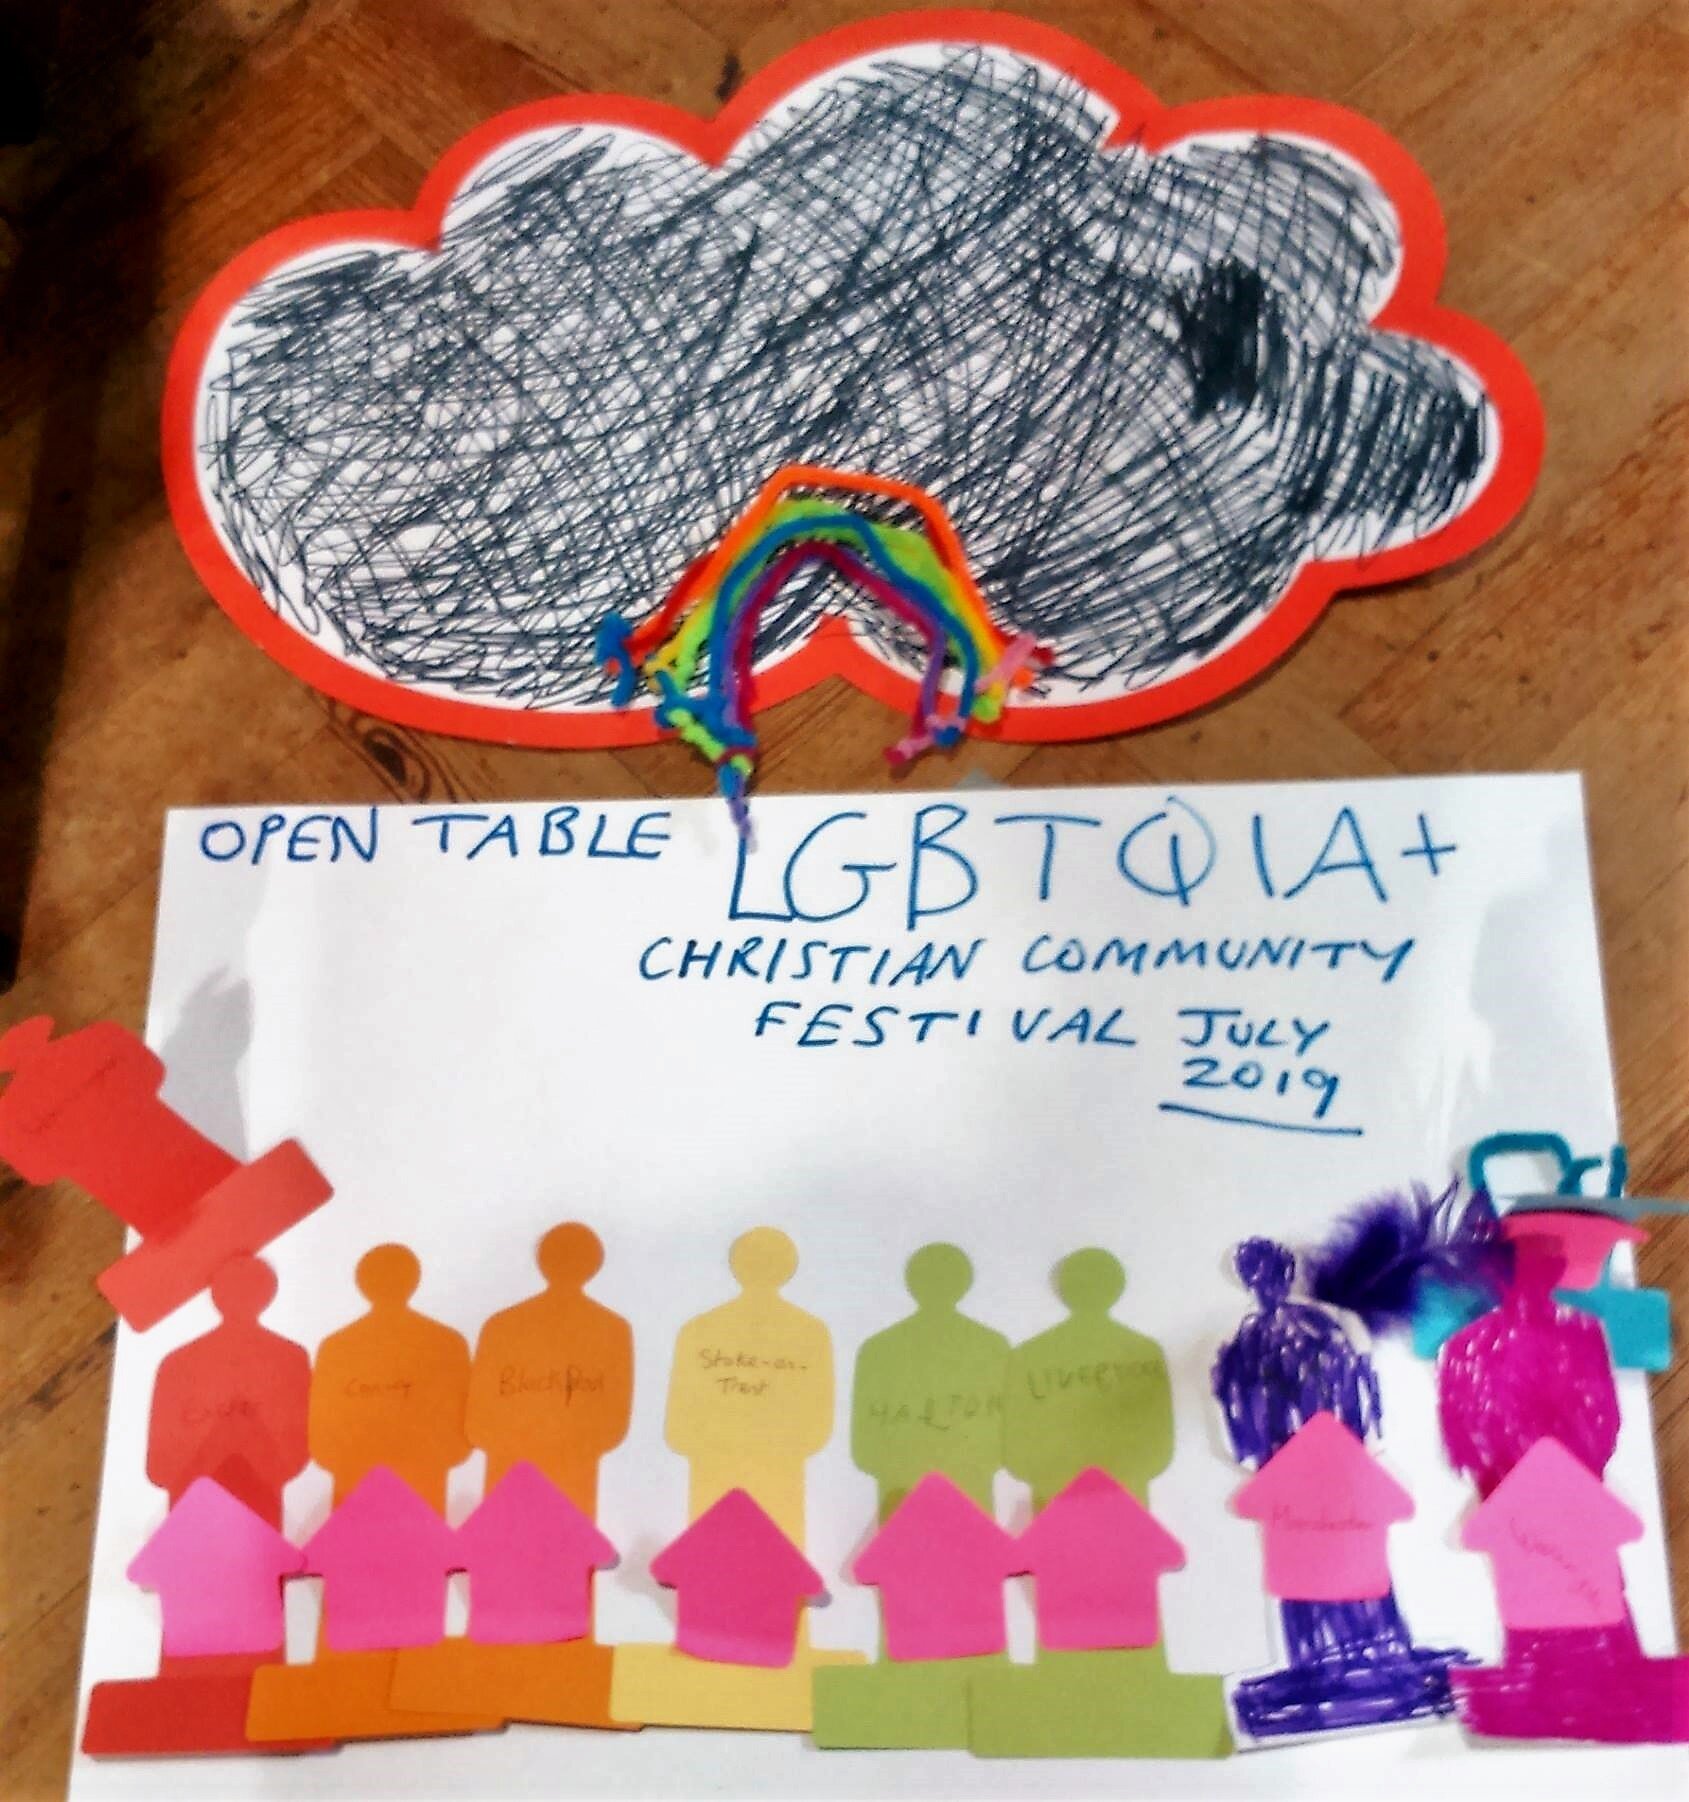  In 2016 a group imagined Open Table hosting an LGBTQIA+ Christian festival in 2019 - this is their artwork, showing 10 communities across England &amp; Wales 